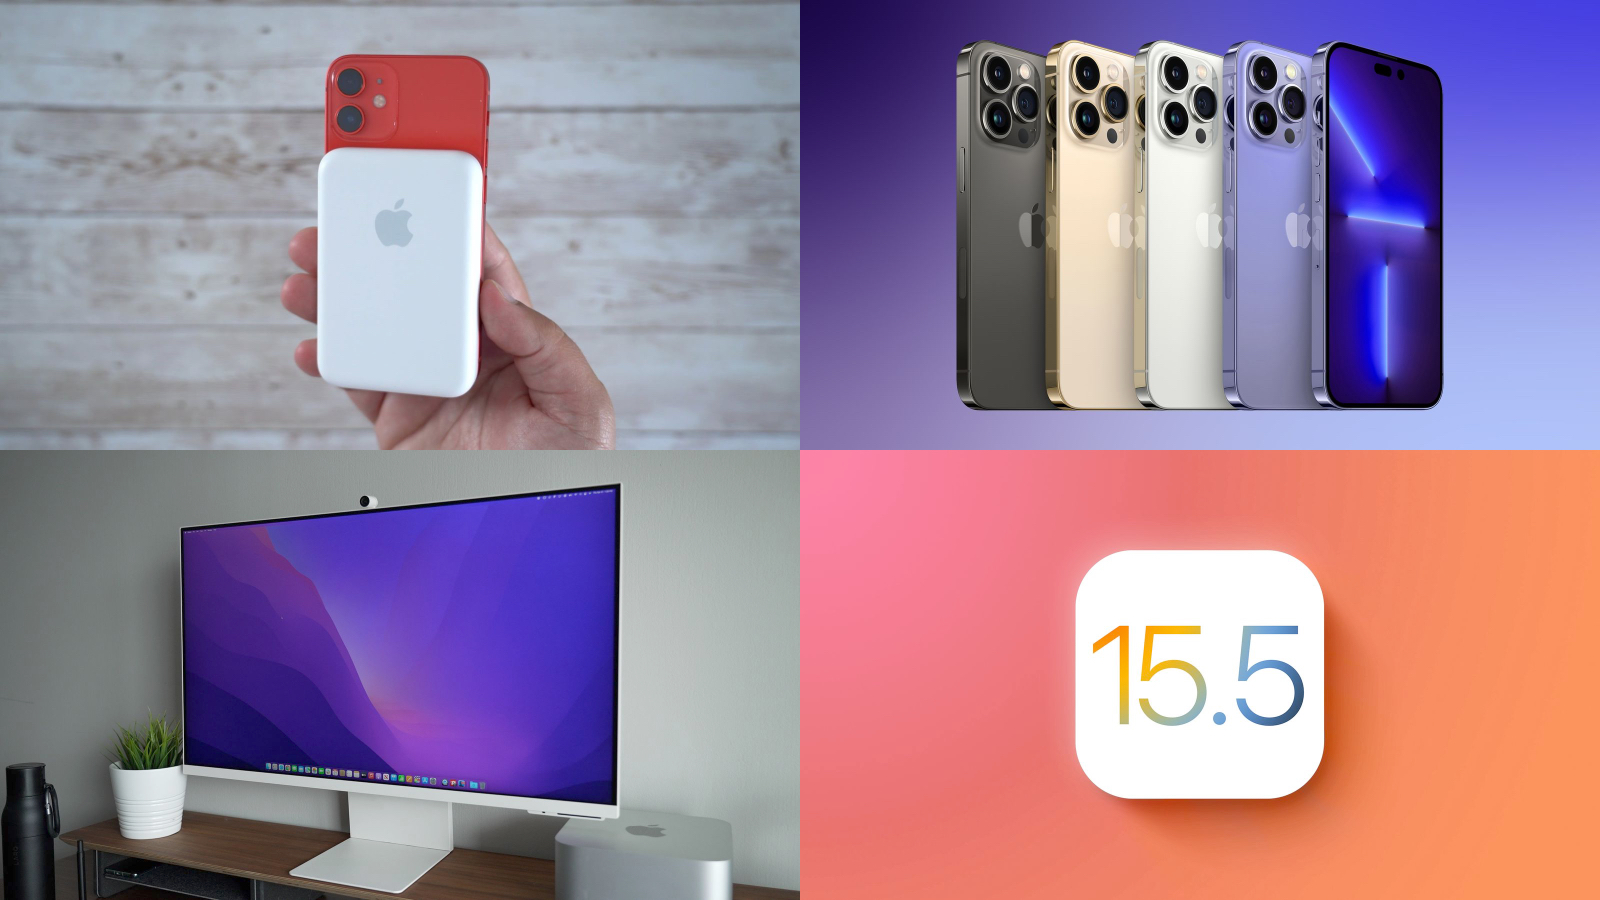 Top Stories: MagSafe Battery Pack Update, iPhone 14 Rumors, and More